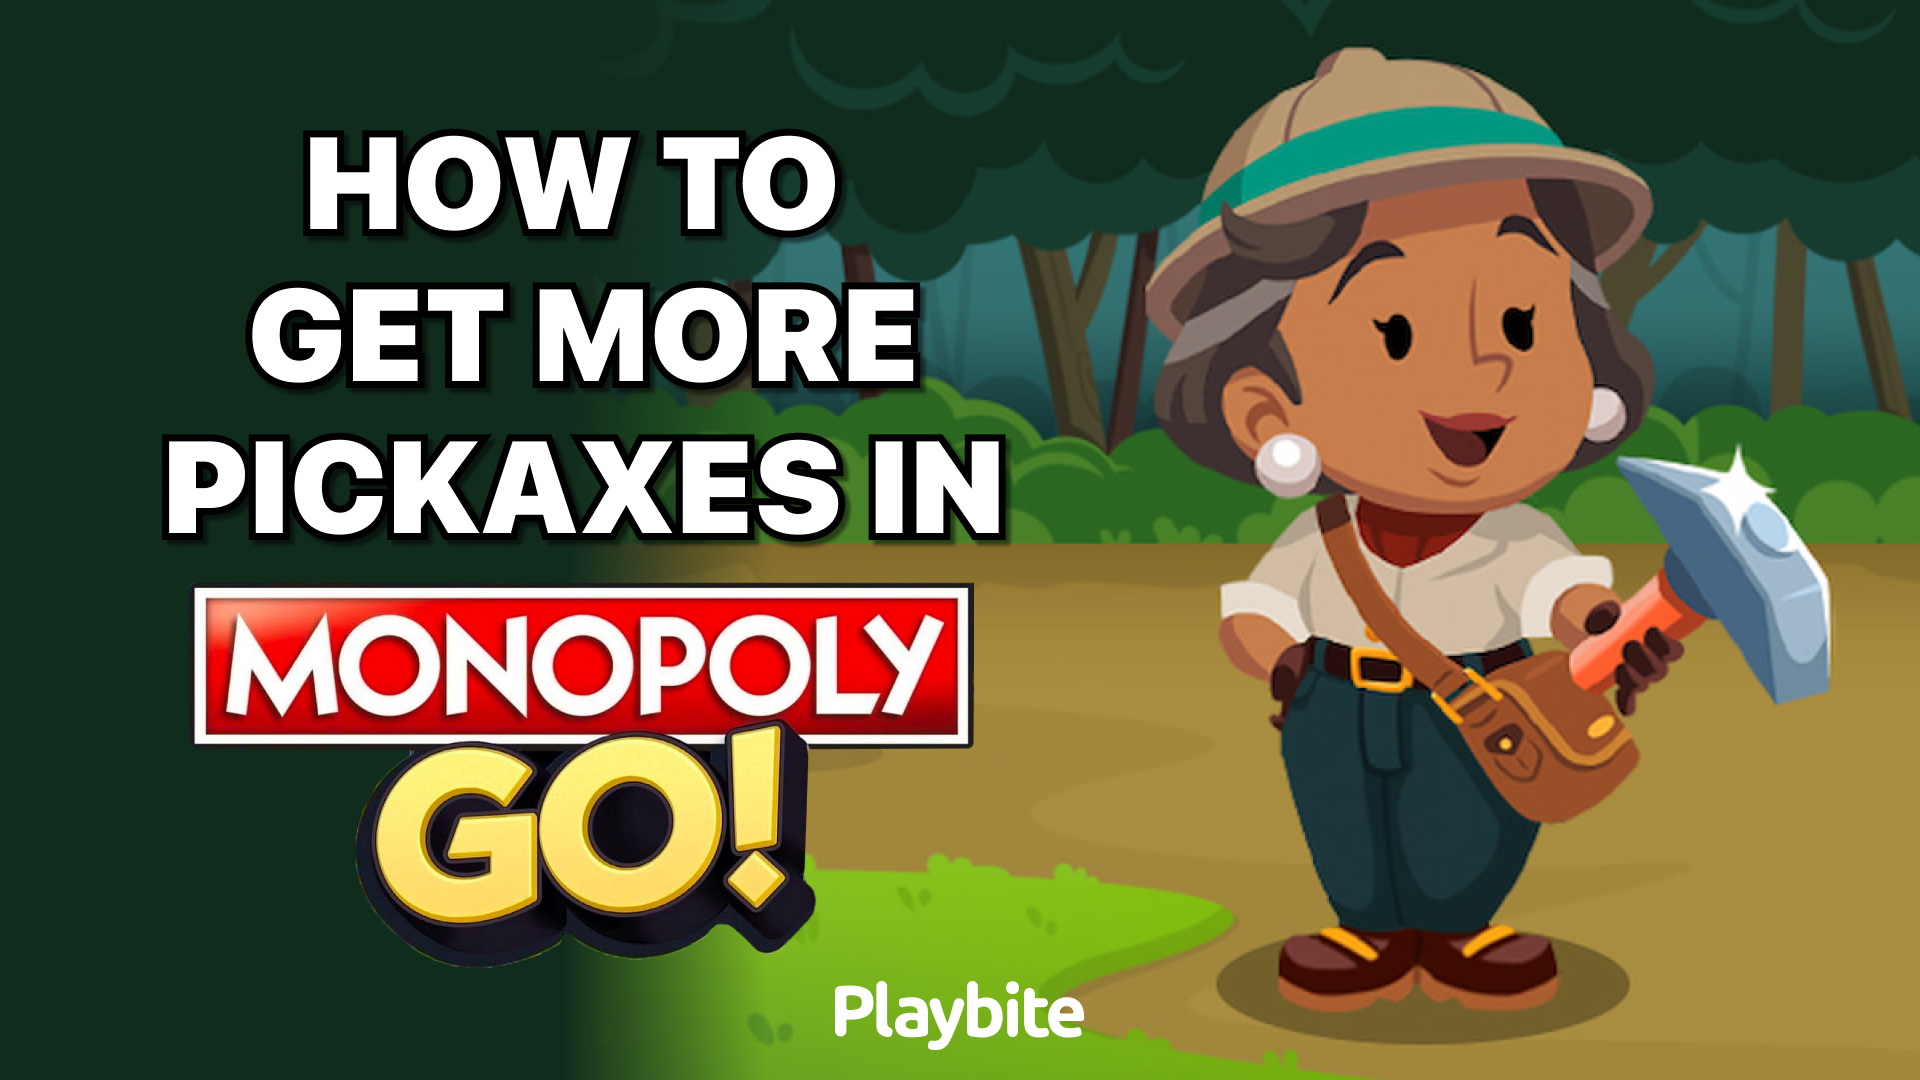 How To Get More Pickaxes In Monopoly GO!